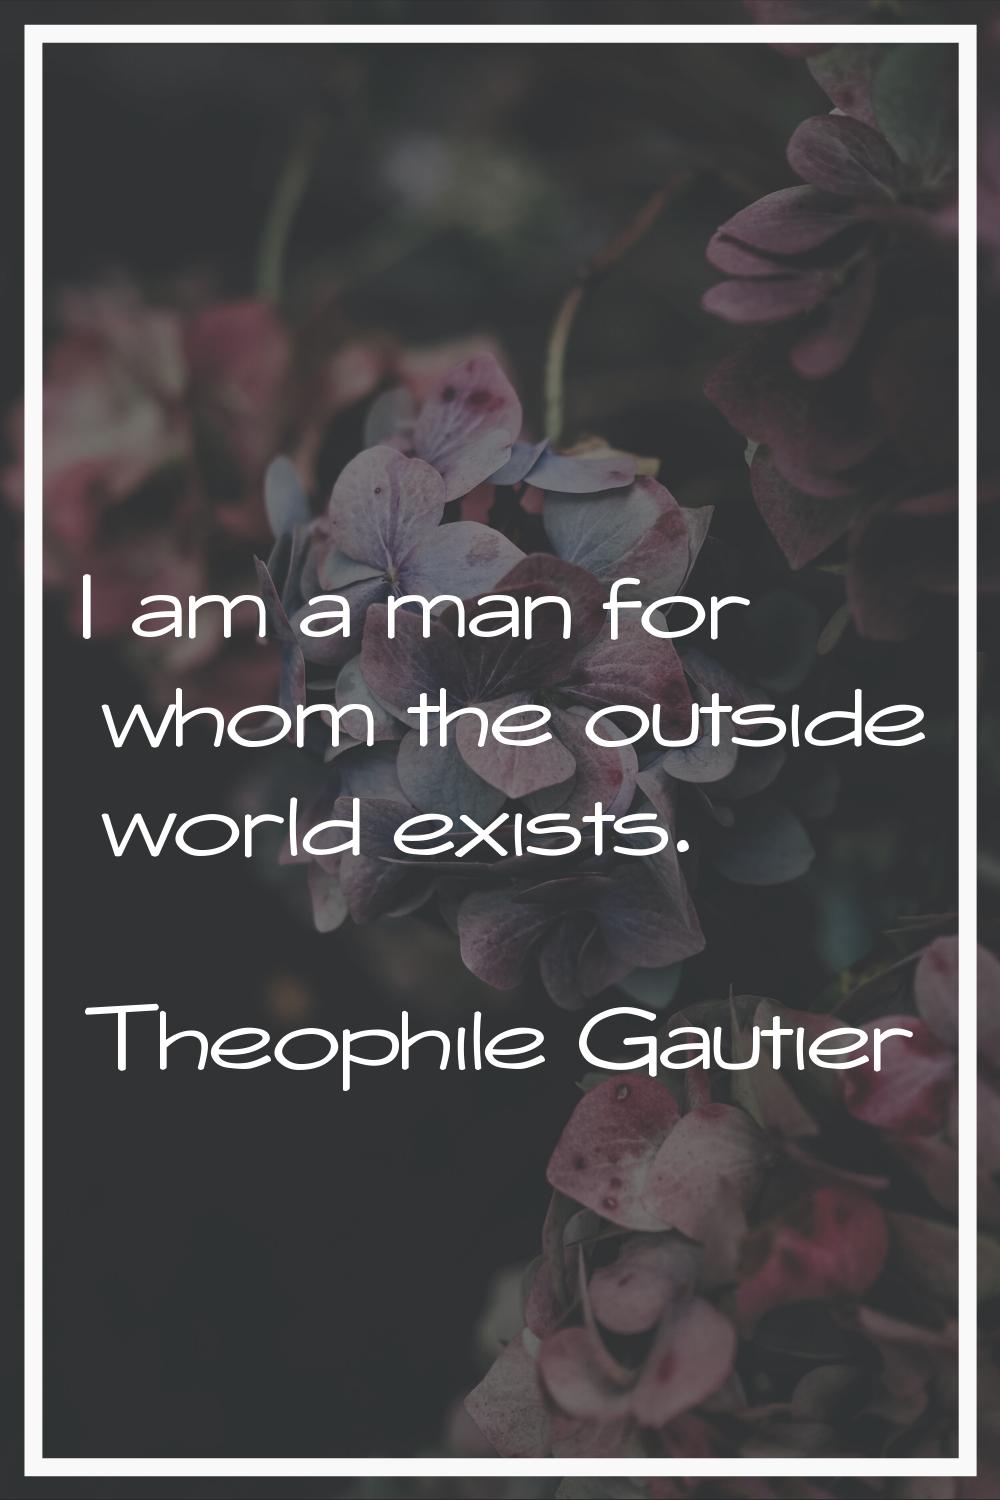 I am a man for whom the outside world exists.